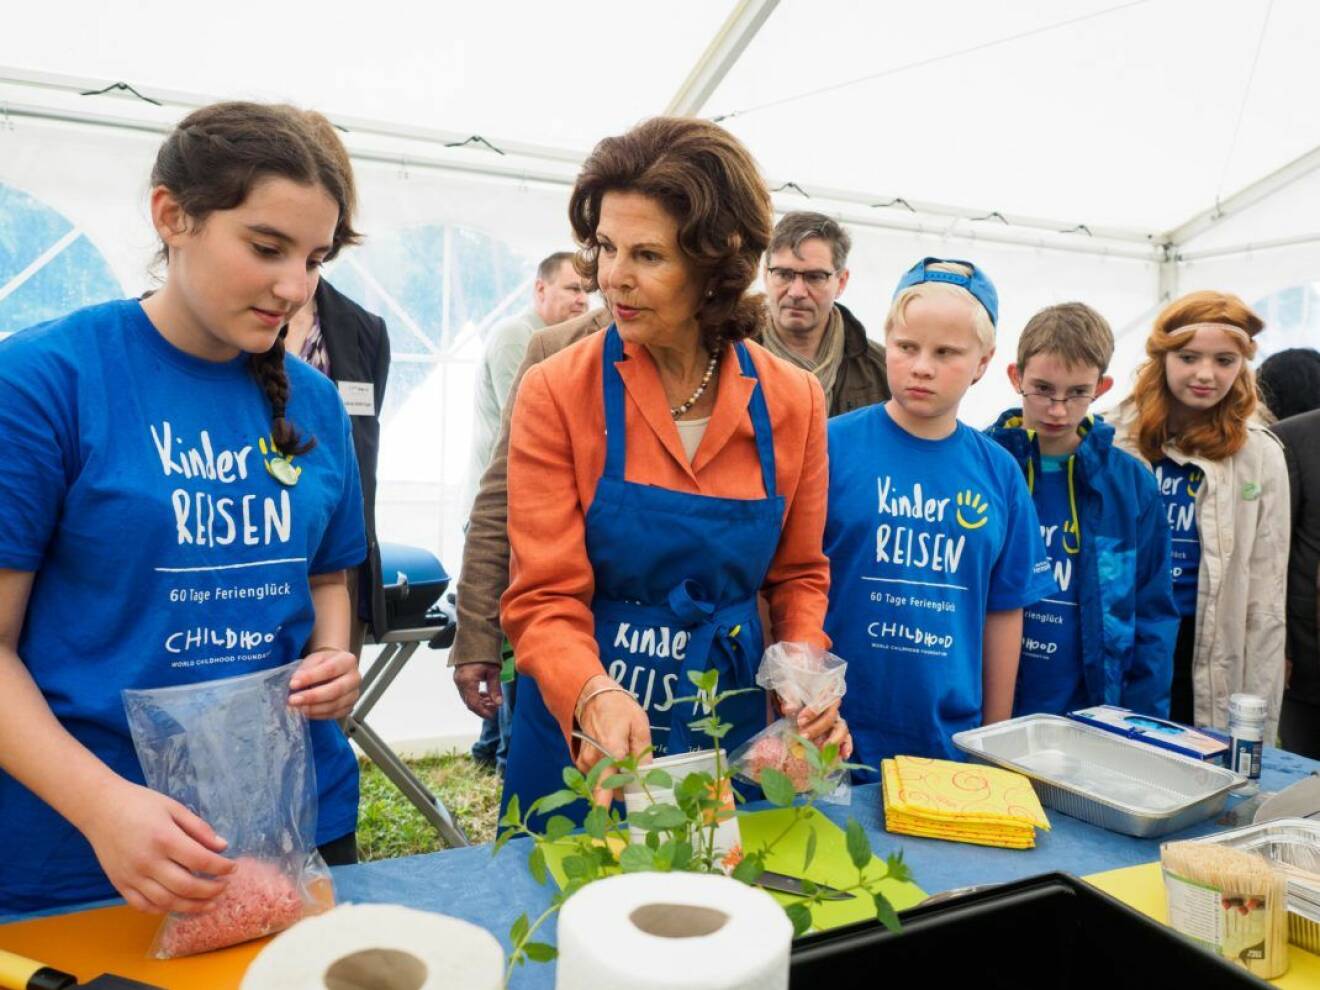 Queen Silvia of Sweden prepares food with children from the summer camp at the Erlebnispark Thurn adventure park in Heroldsbach, Germany, 2 August 2016. Queen Silvia of Sweden visited the children's holiday camp of the German TV lottery at the Schloss Thurn adventure park. PHOTO: NICOLAS ARMER/DPA (c) DPA / IBL Bildbyrå